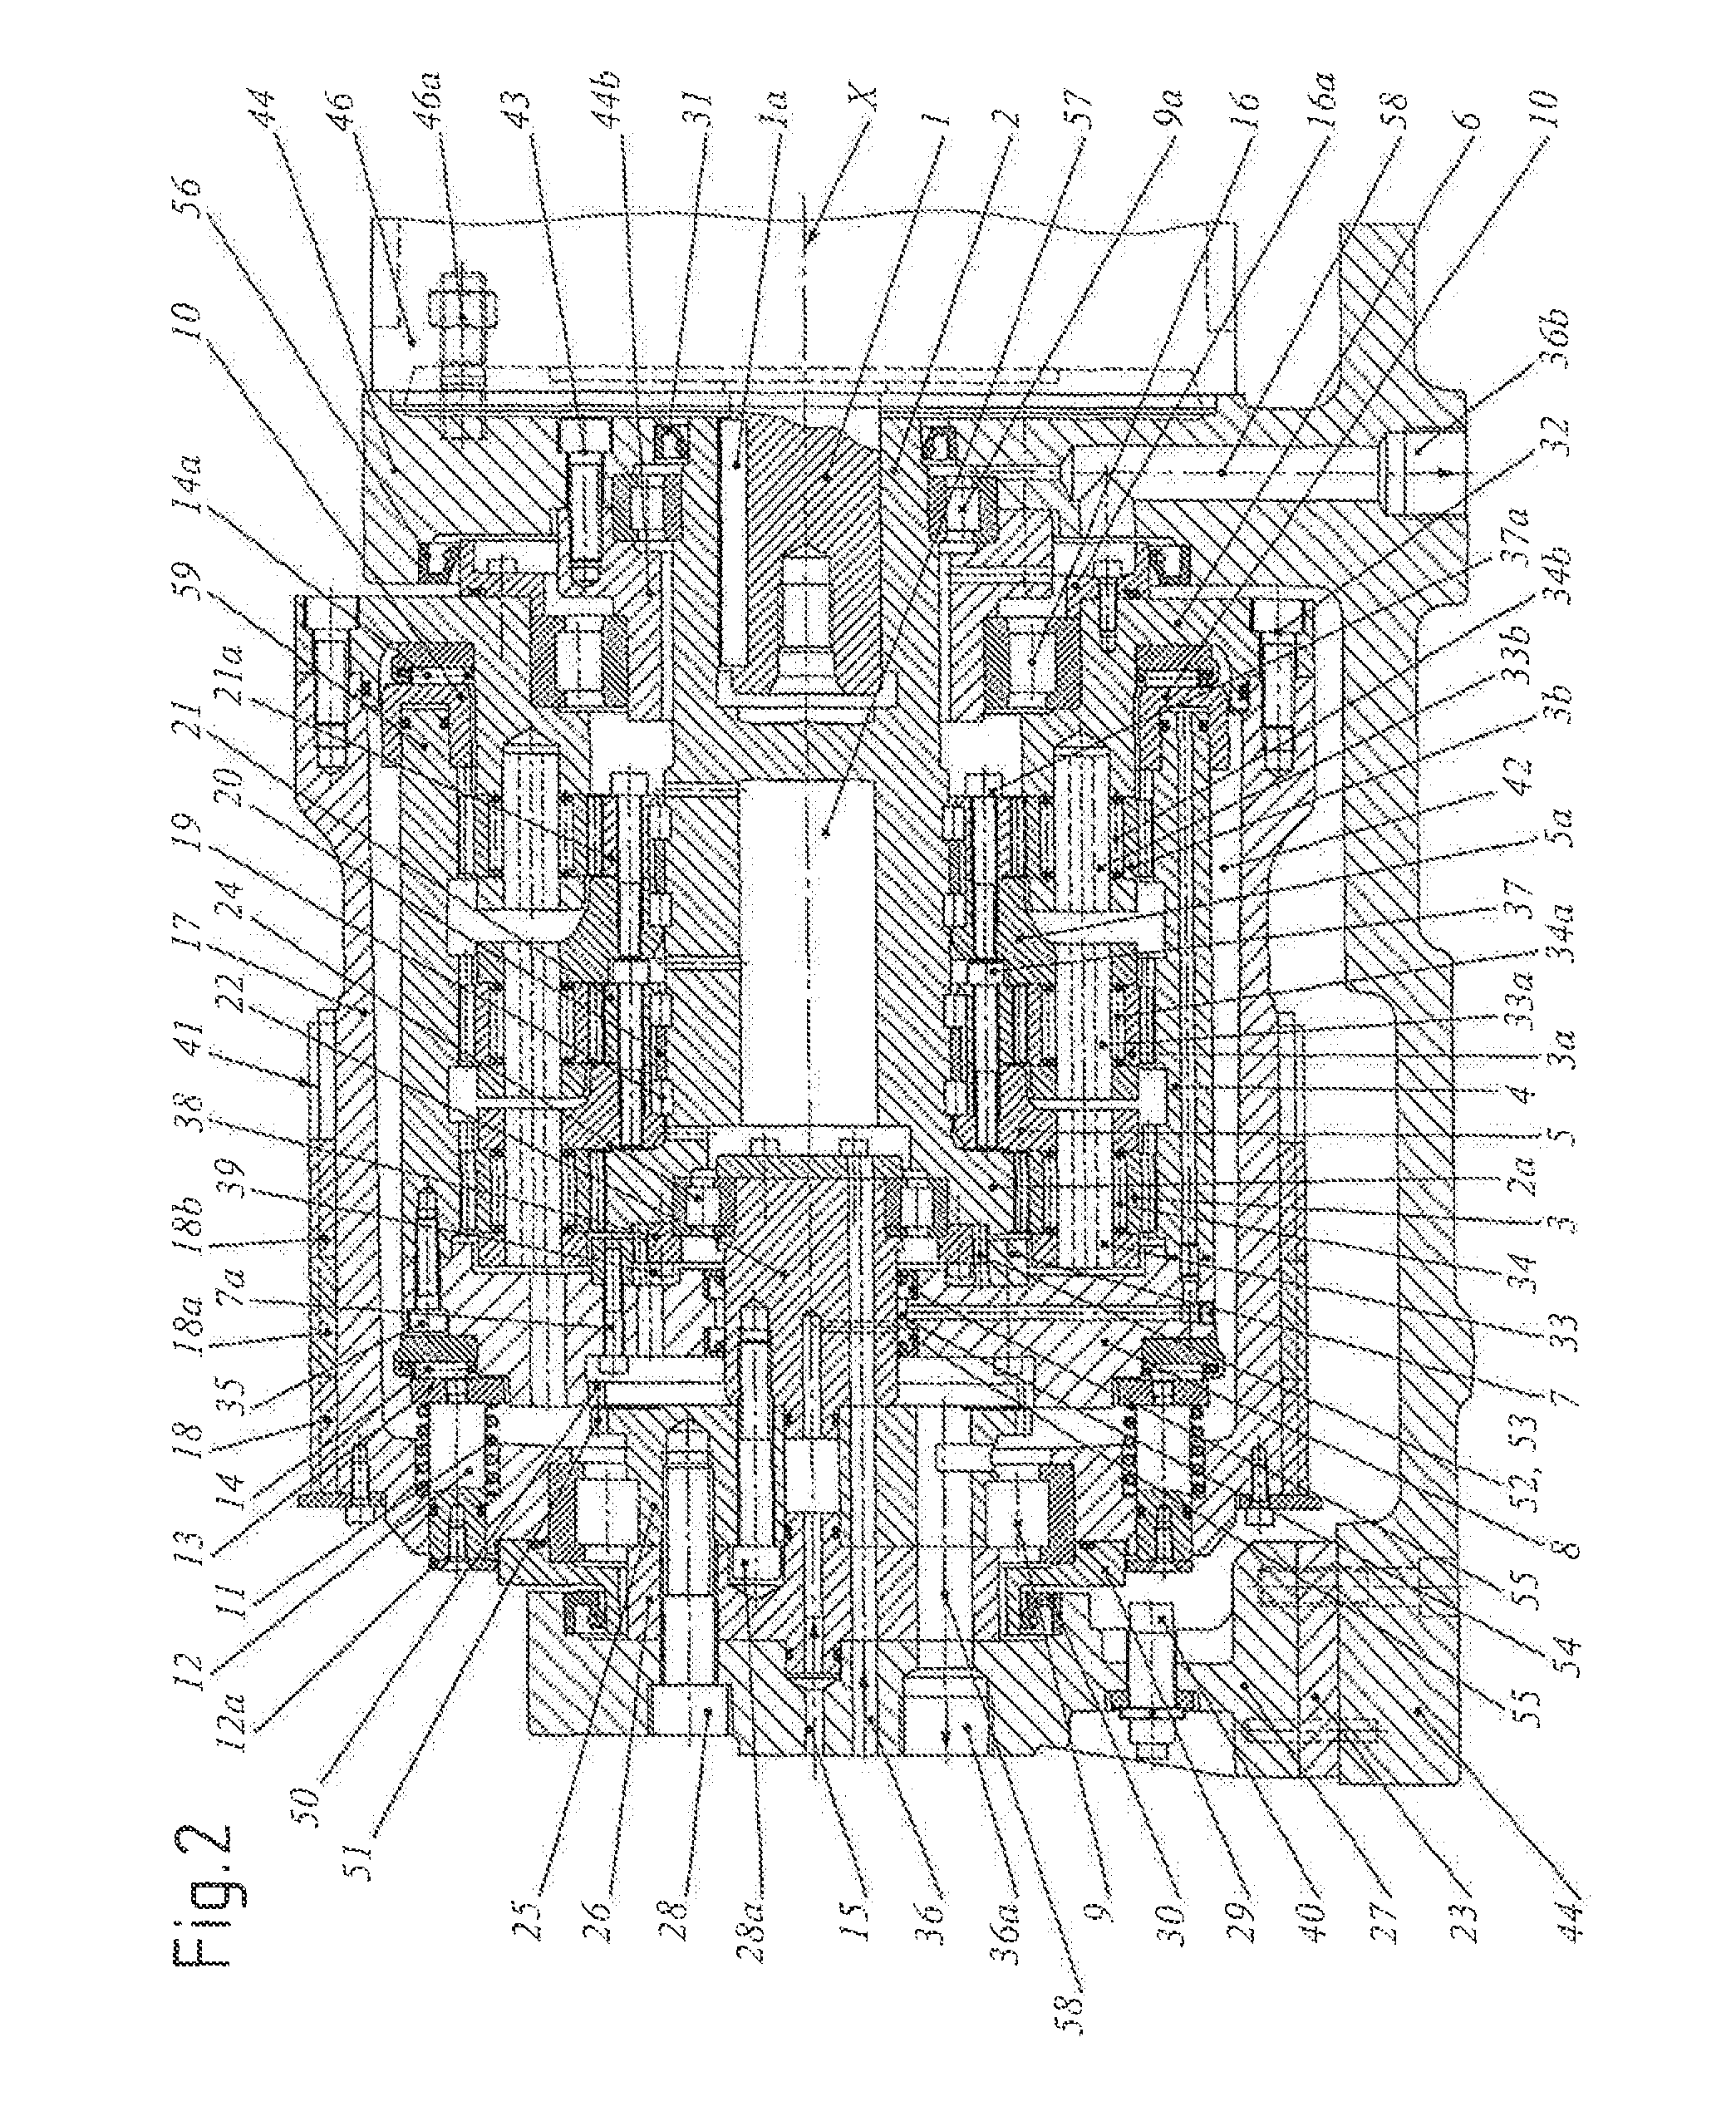 Gear train unit and arrangement for a stamping press